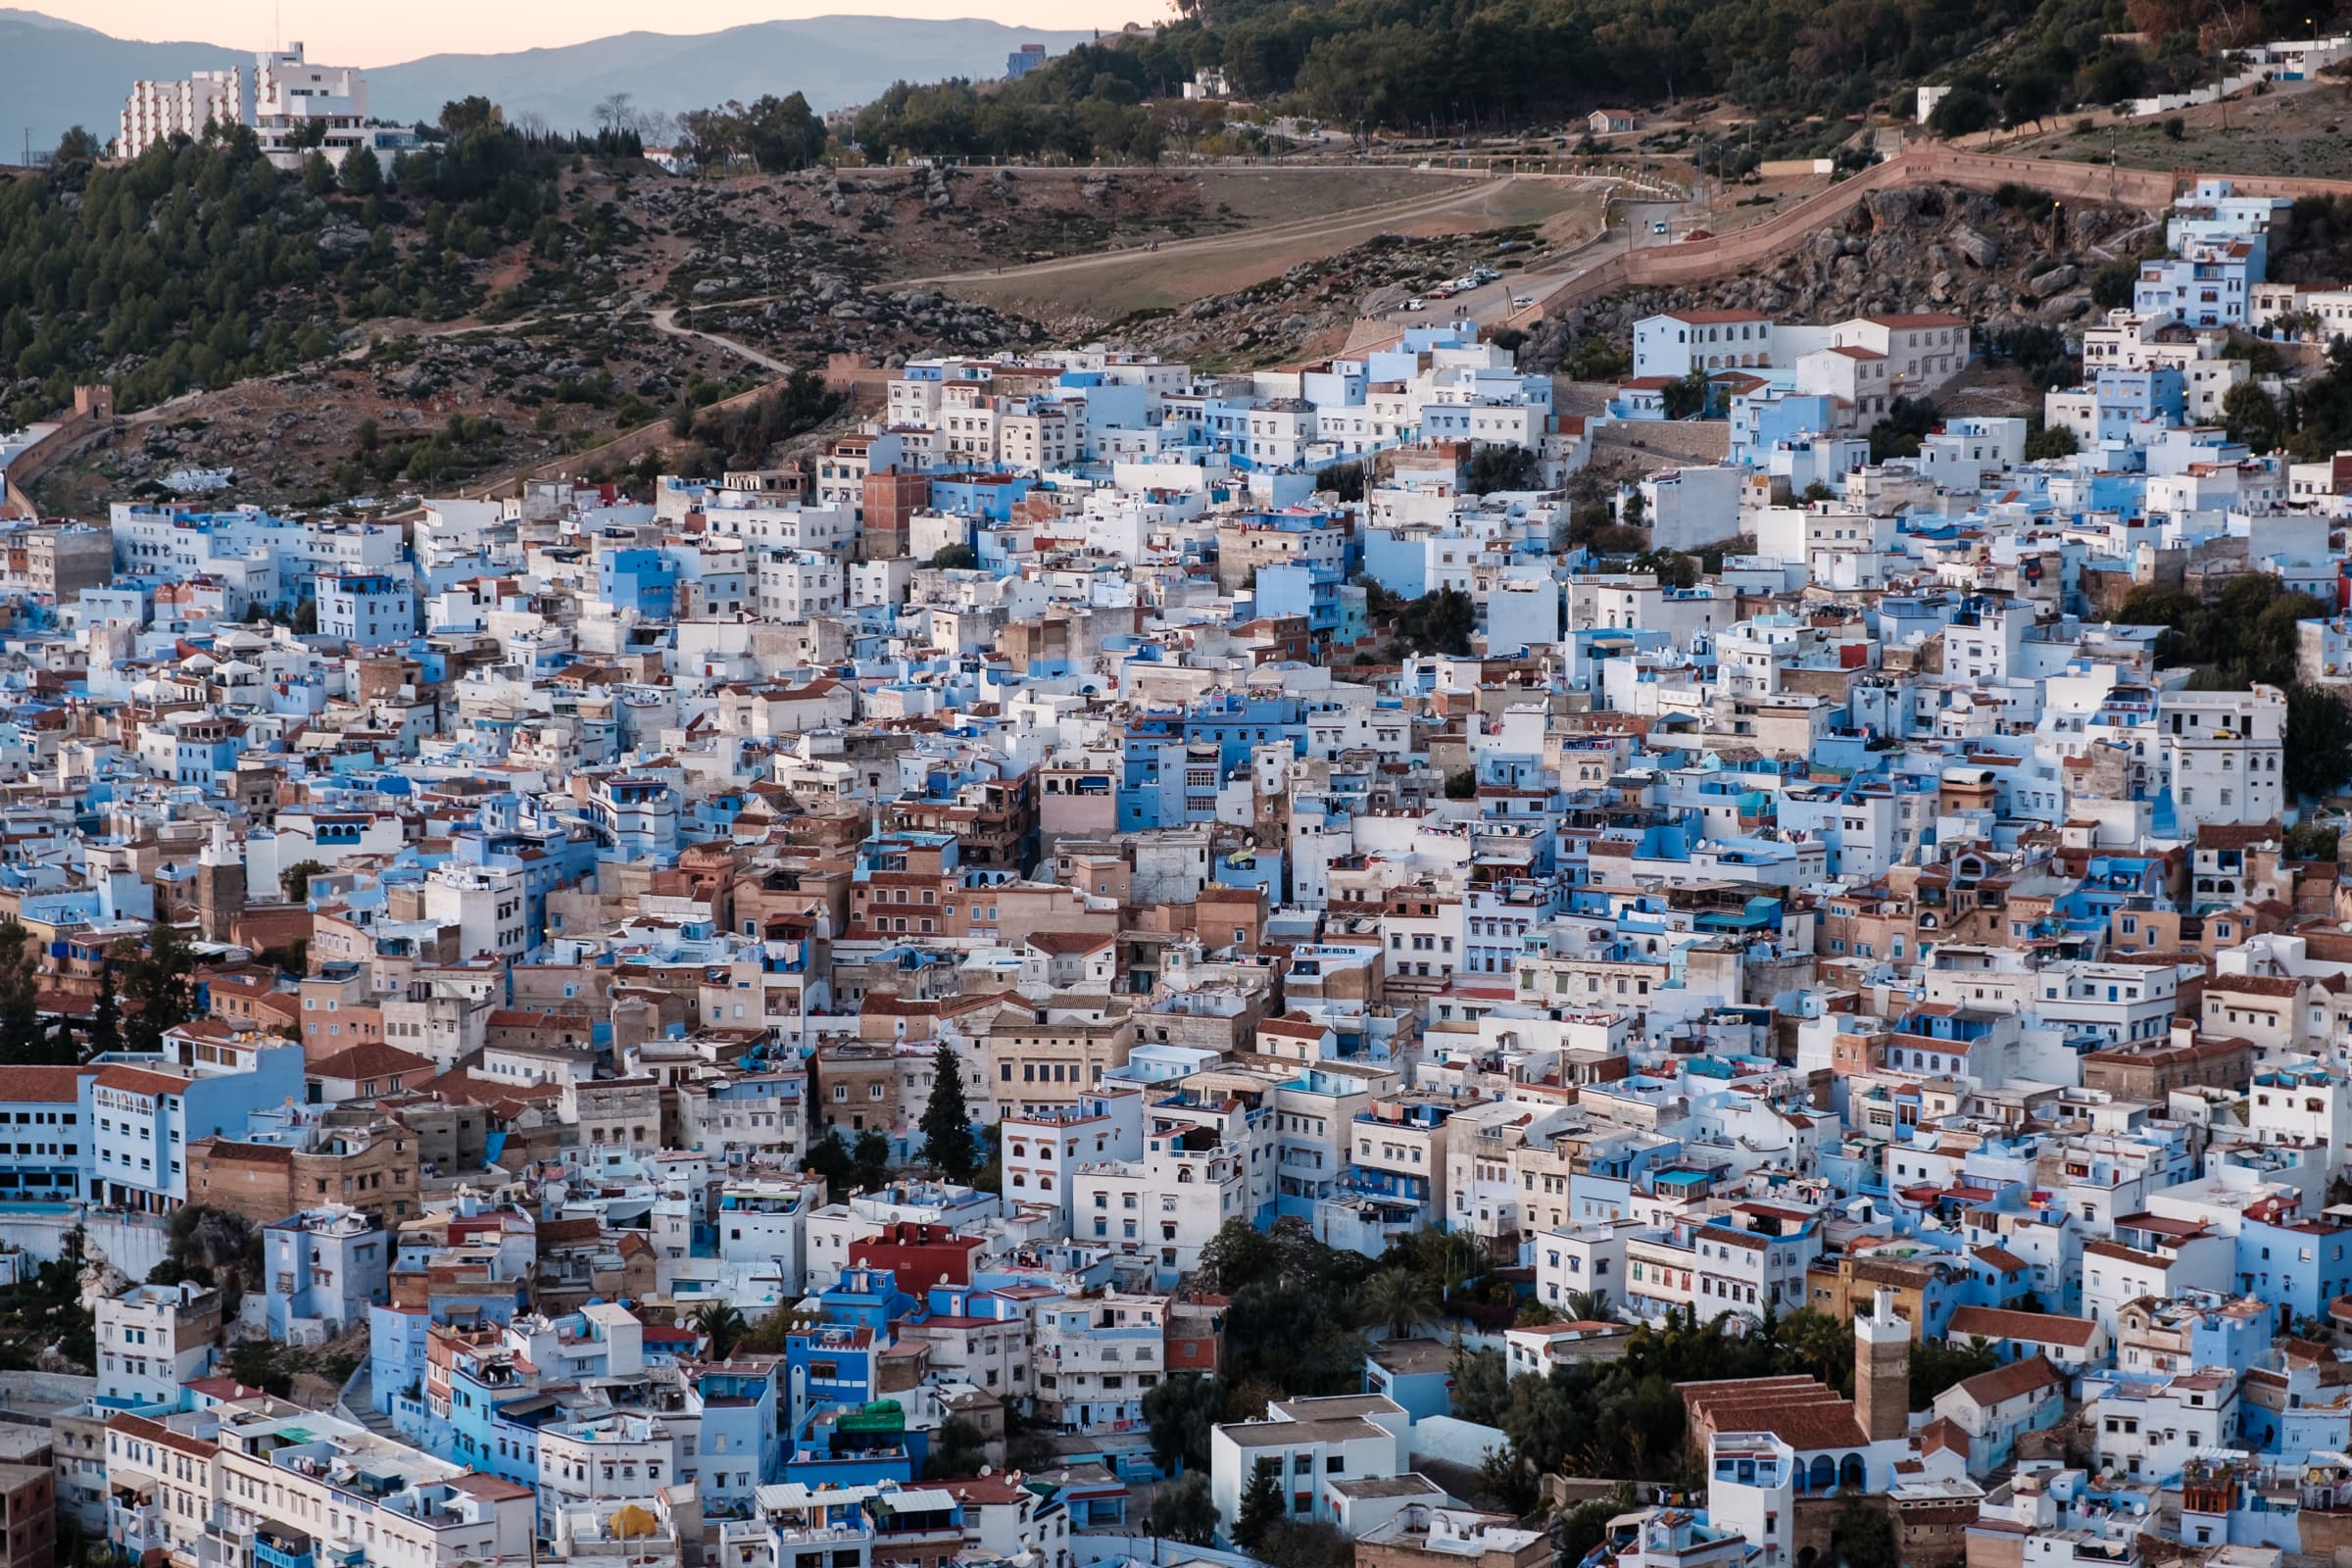 Chefchaouen, Morocco from the Spanish Mosque at sunset